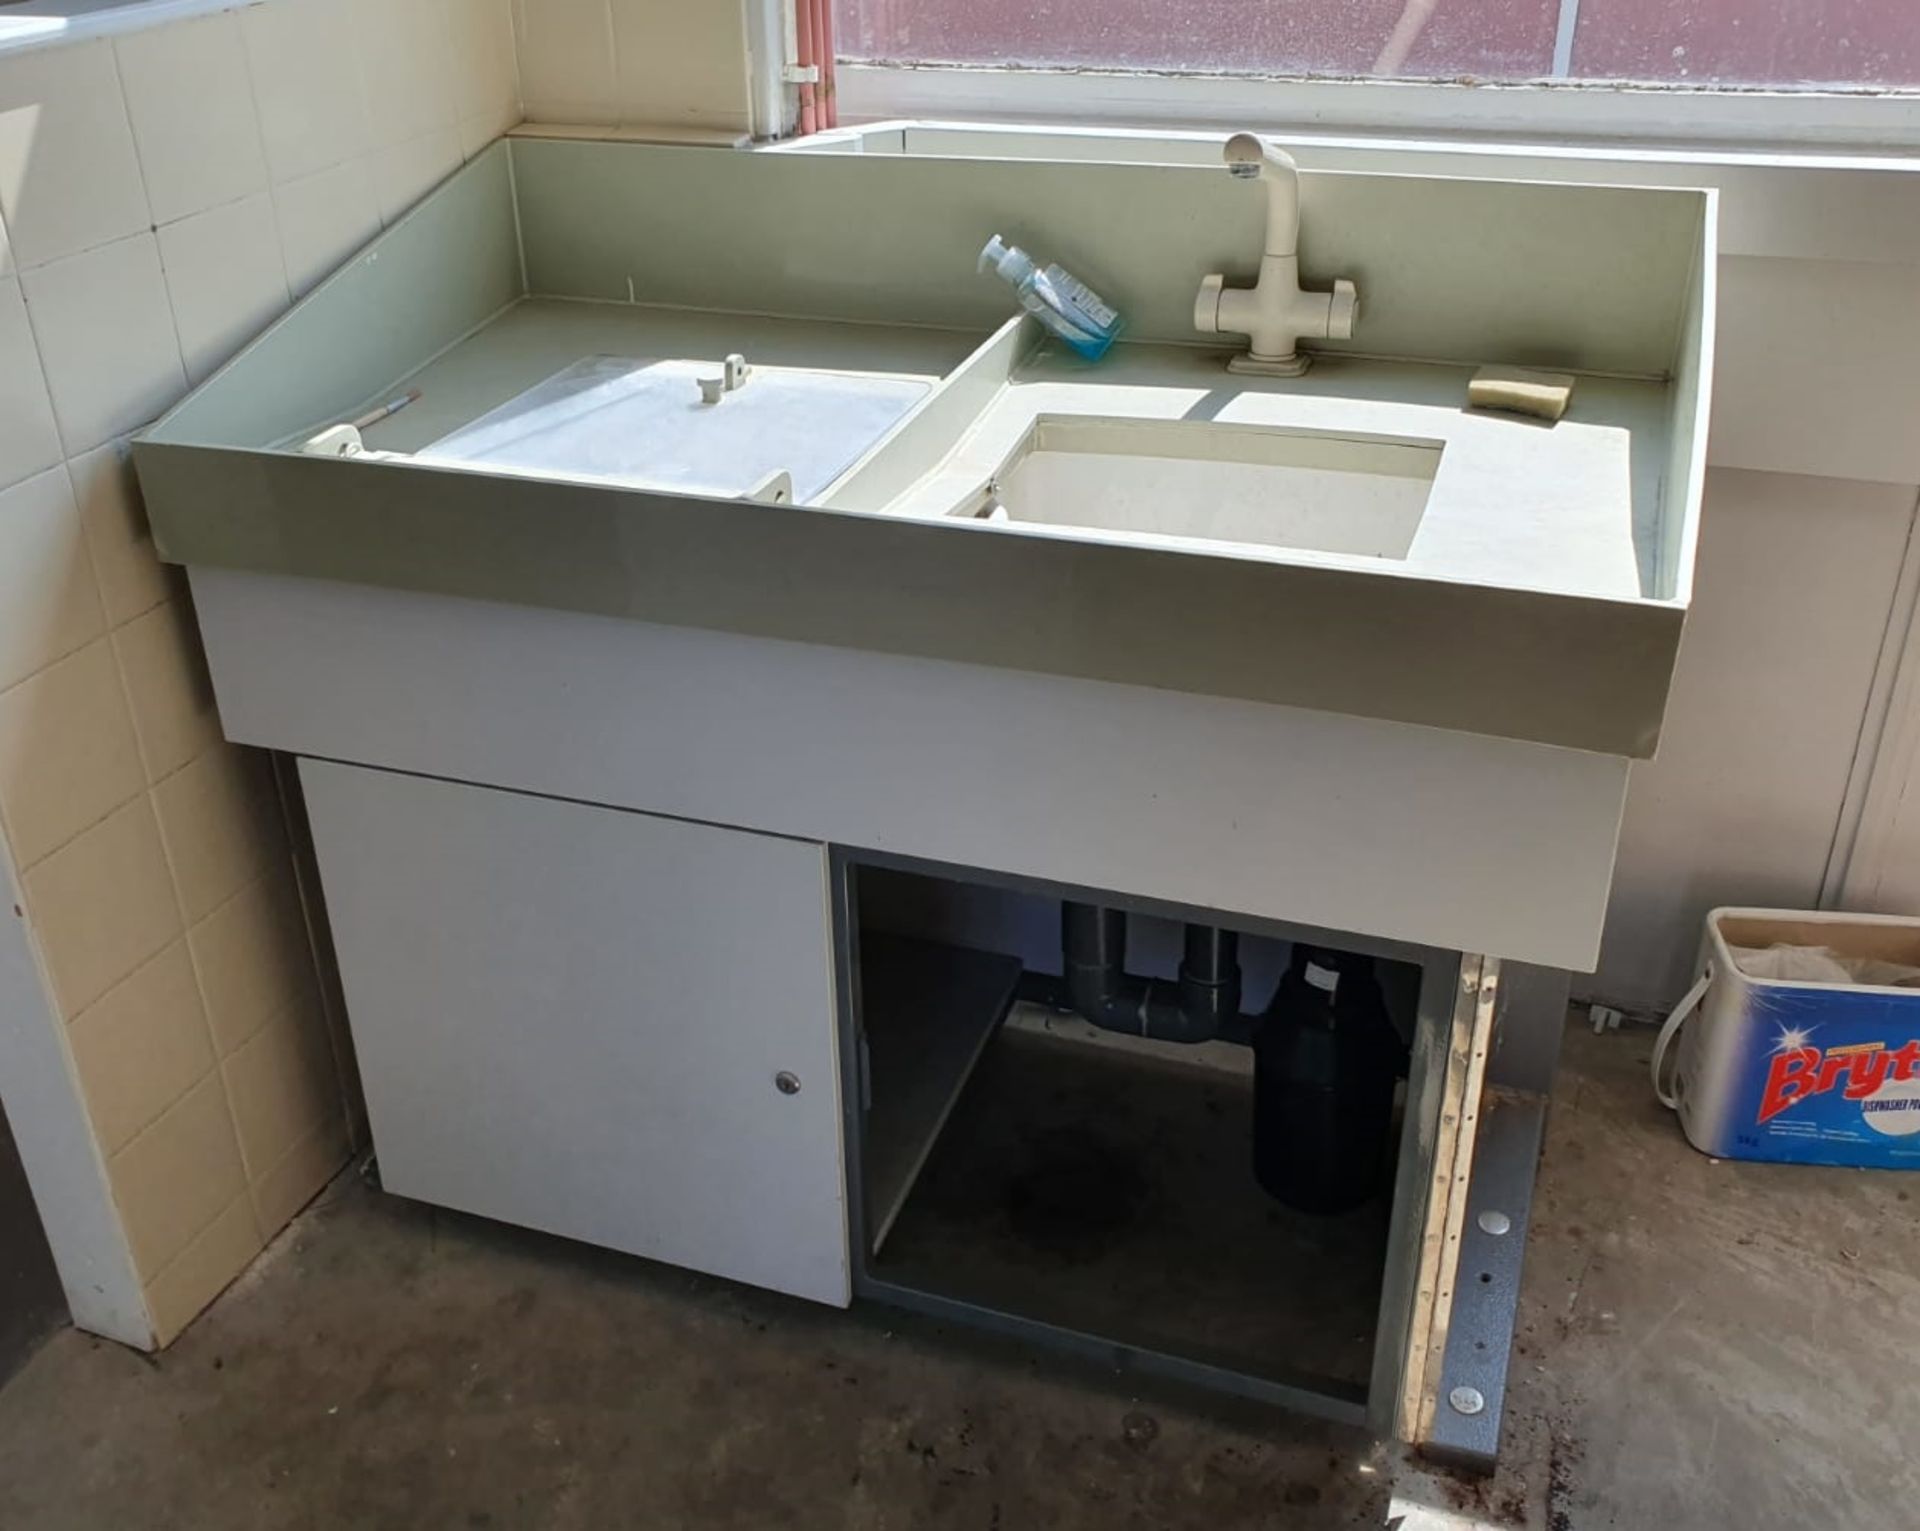 1 x Sink Basin With Anti Spash Sides, Steel Frame and Mixer Tap - CL499 - Location: Borehamwood